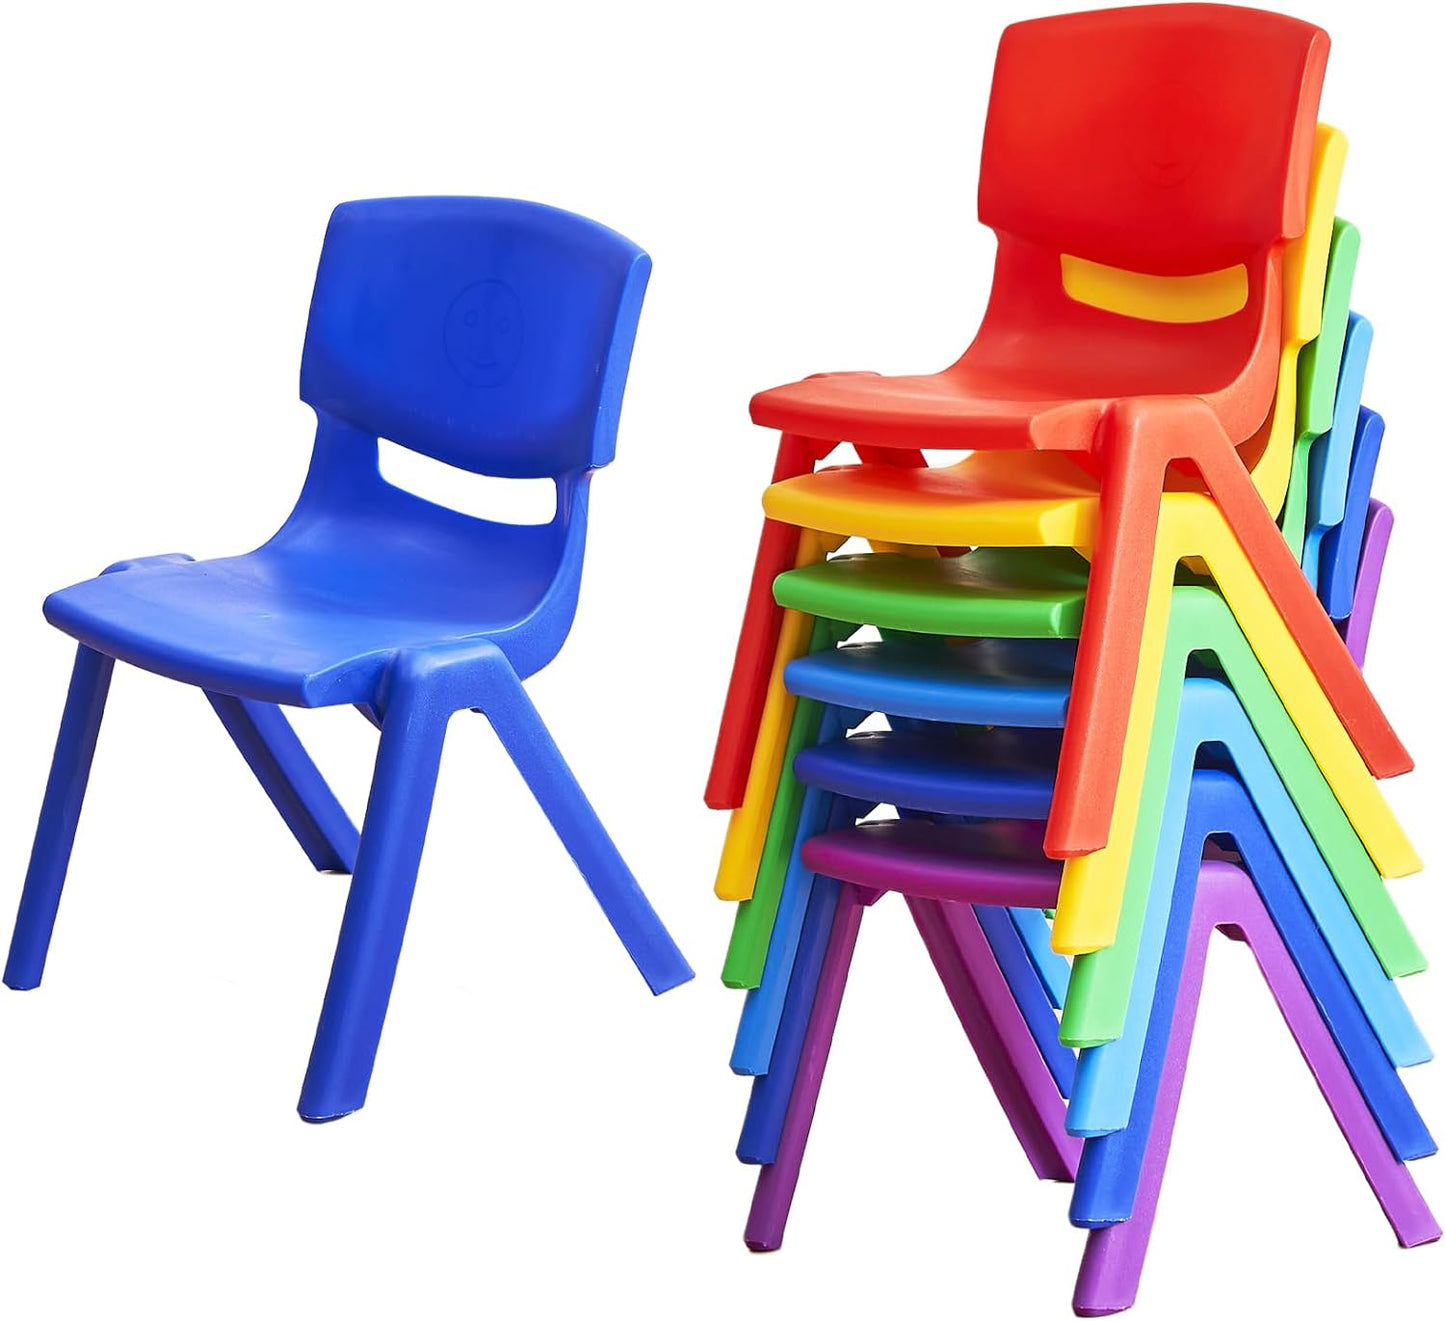 12Pcs Stackable School Chairs, Colorful Kids Plastic Chair for Toddlers with 12'' Seat, Kids Flexible Seating for Classroom Elementary, School, Daycare, Outdoor, Classroom Furniture (12PCS)